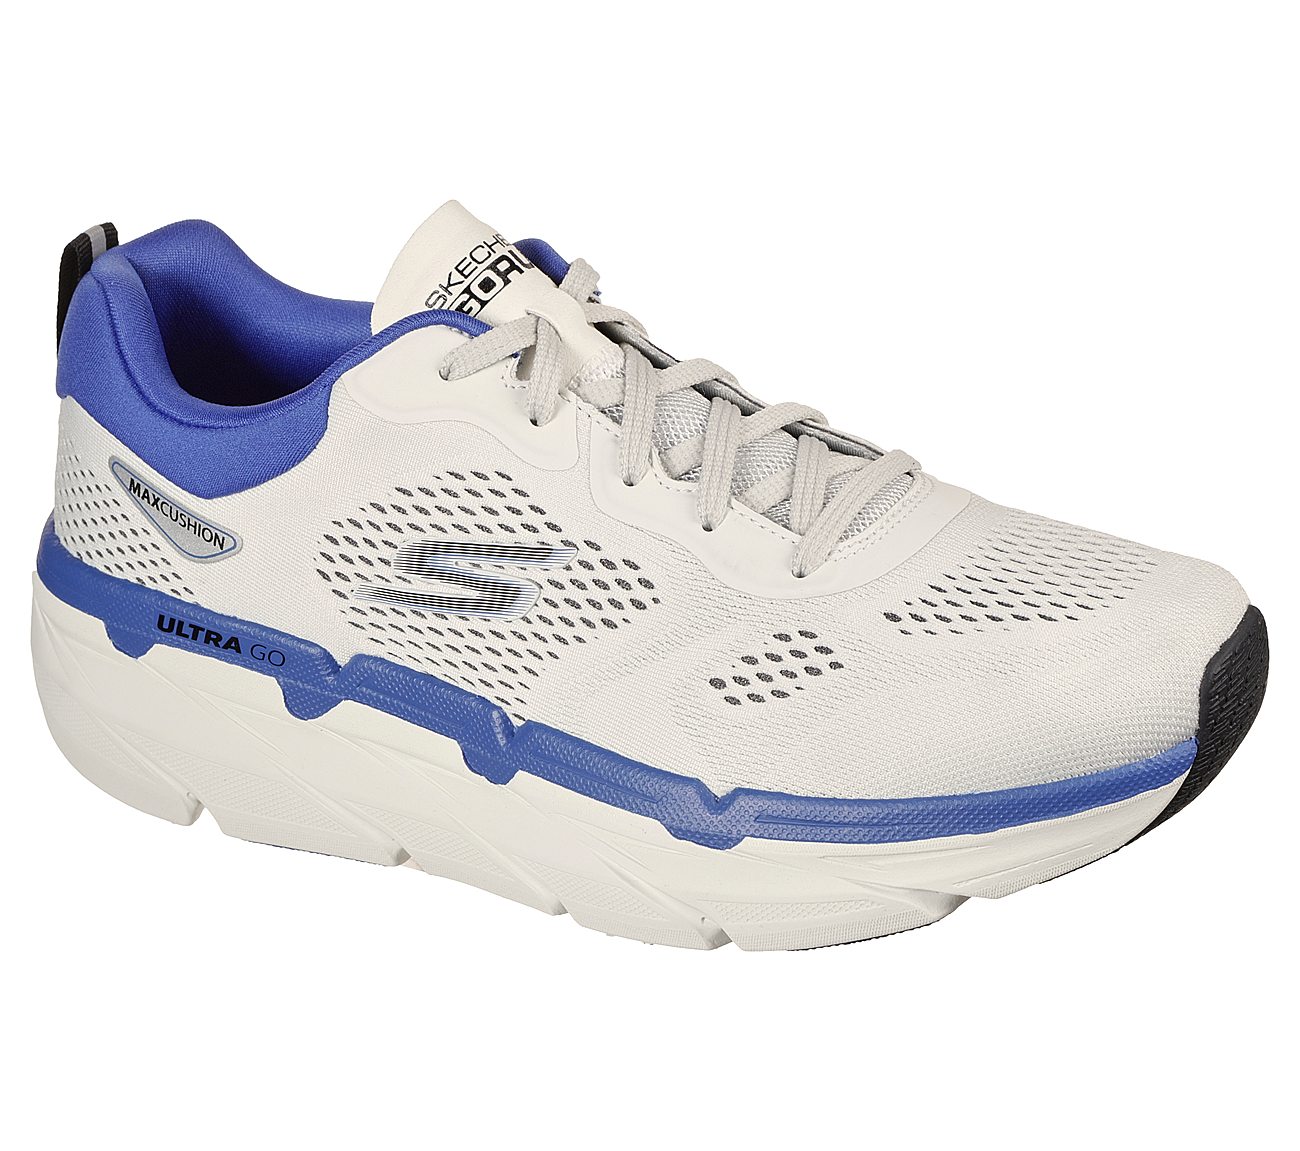 MAX CUSHIONING PREMIER -PERSP, WHITE/BLUE Footwear Lateral View